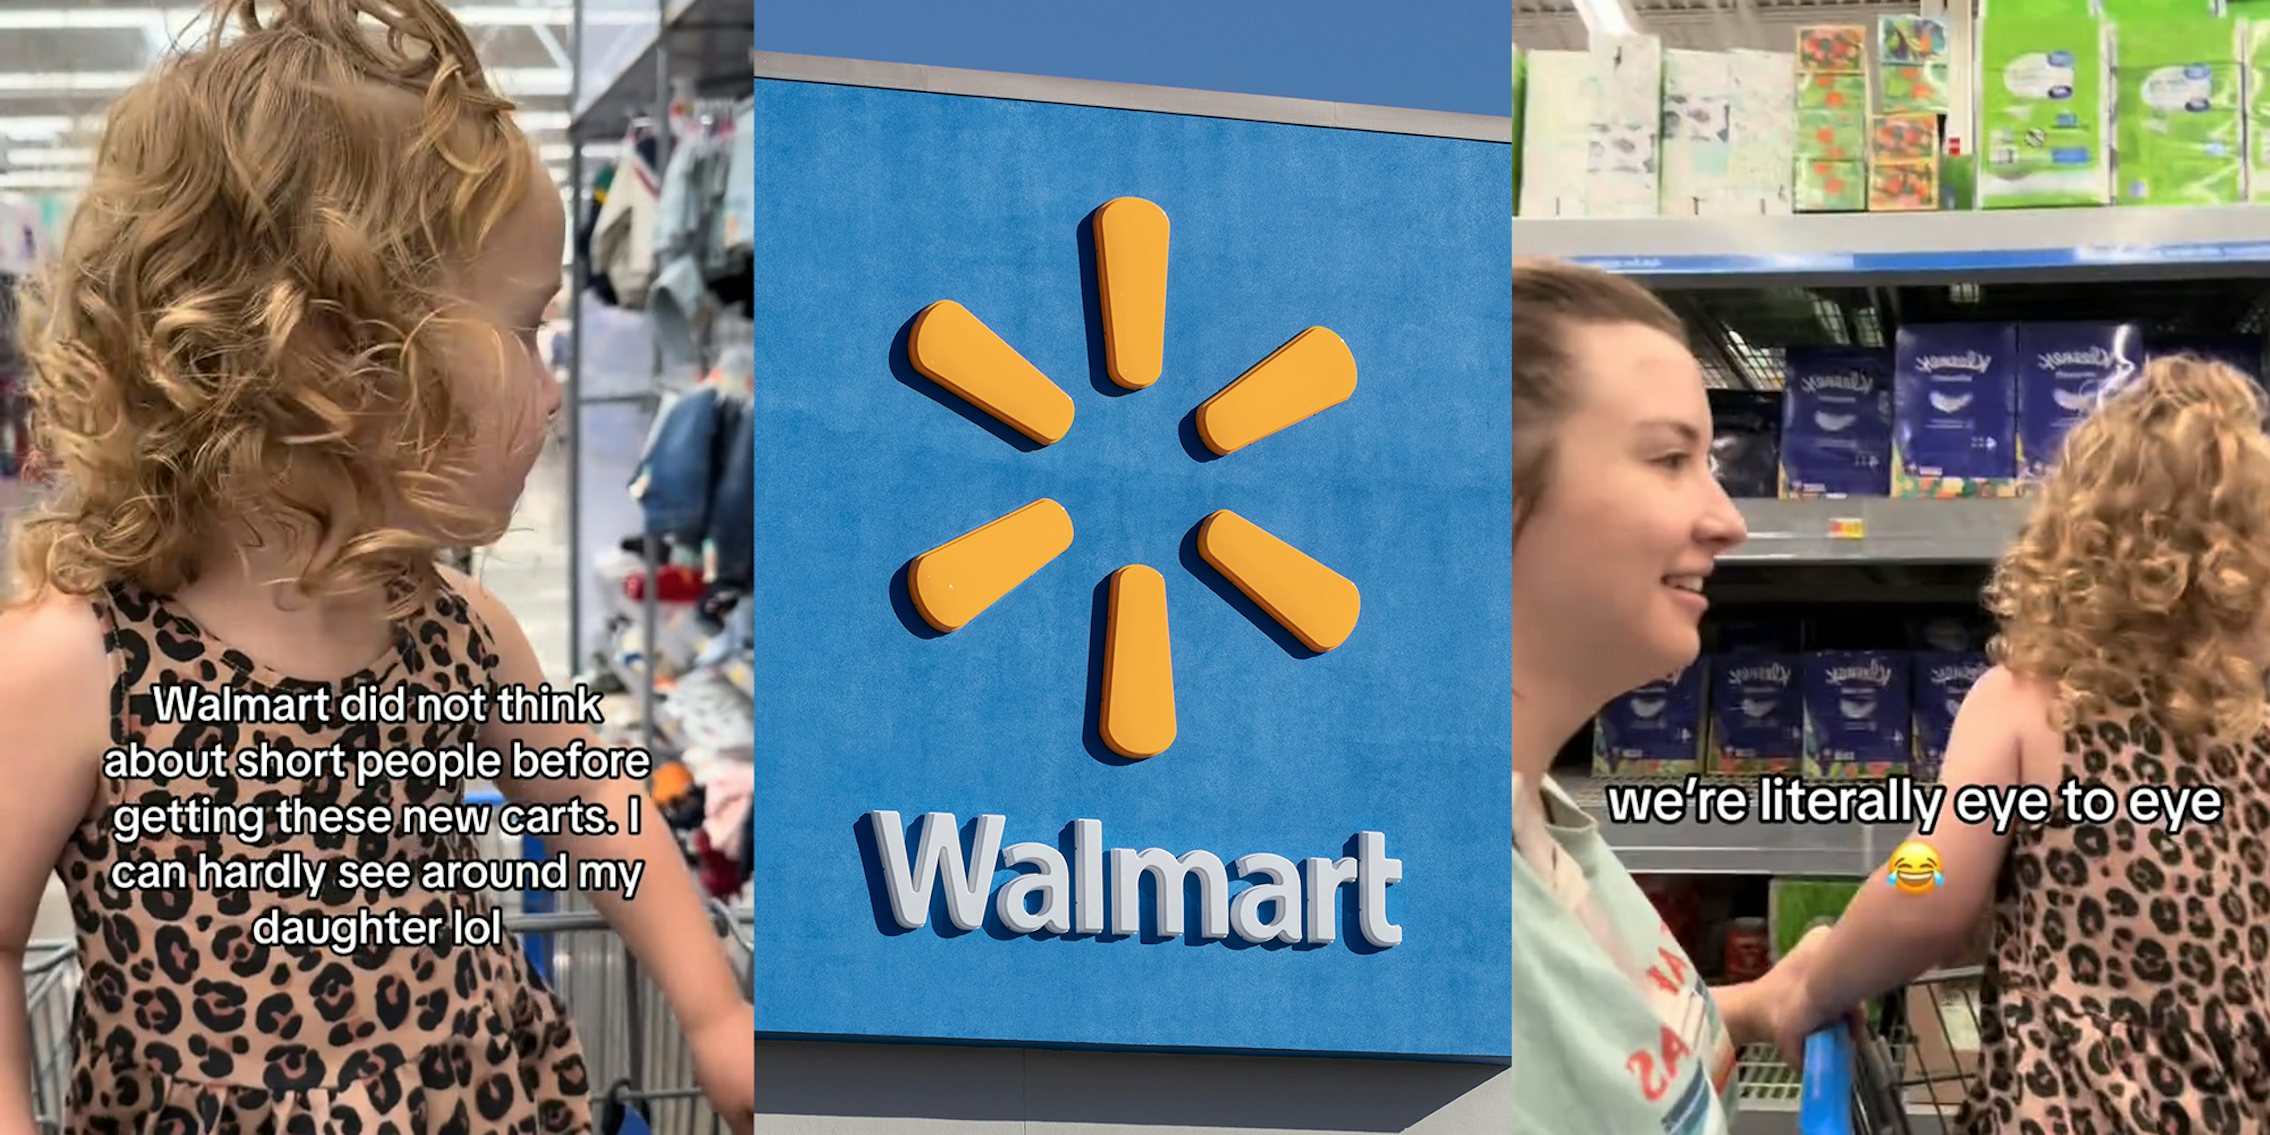 Walmart shopper complains about new shopping carts, says she’s now eye-to-eye with her child